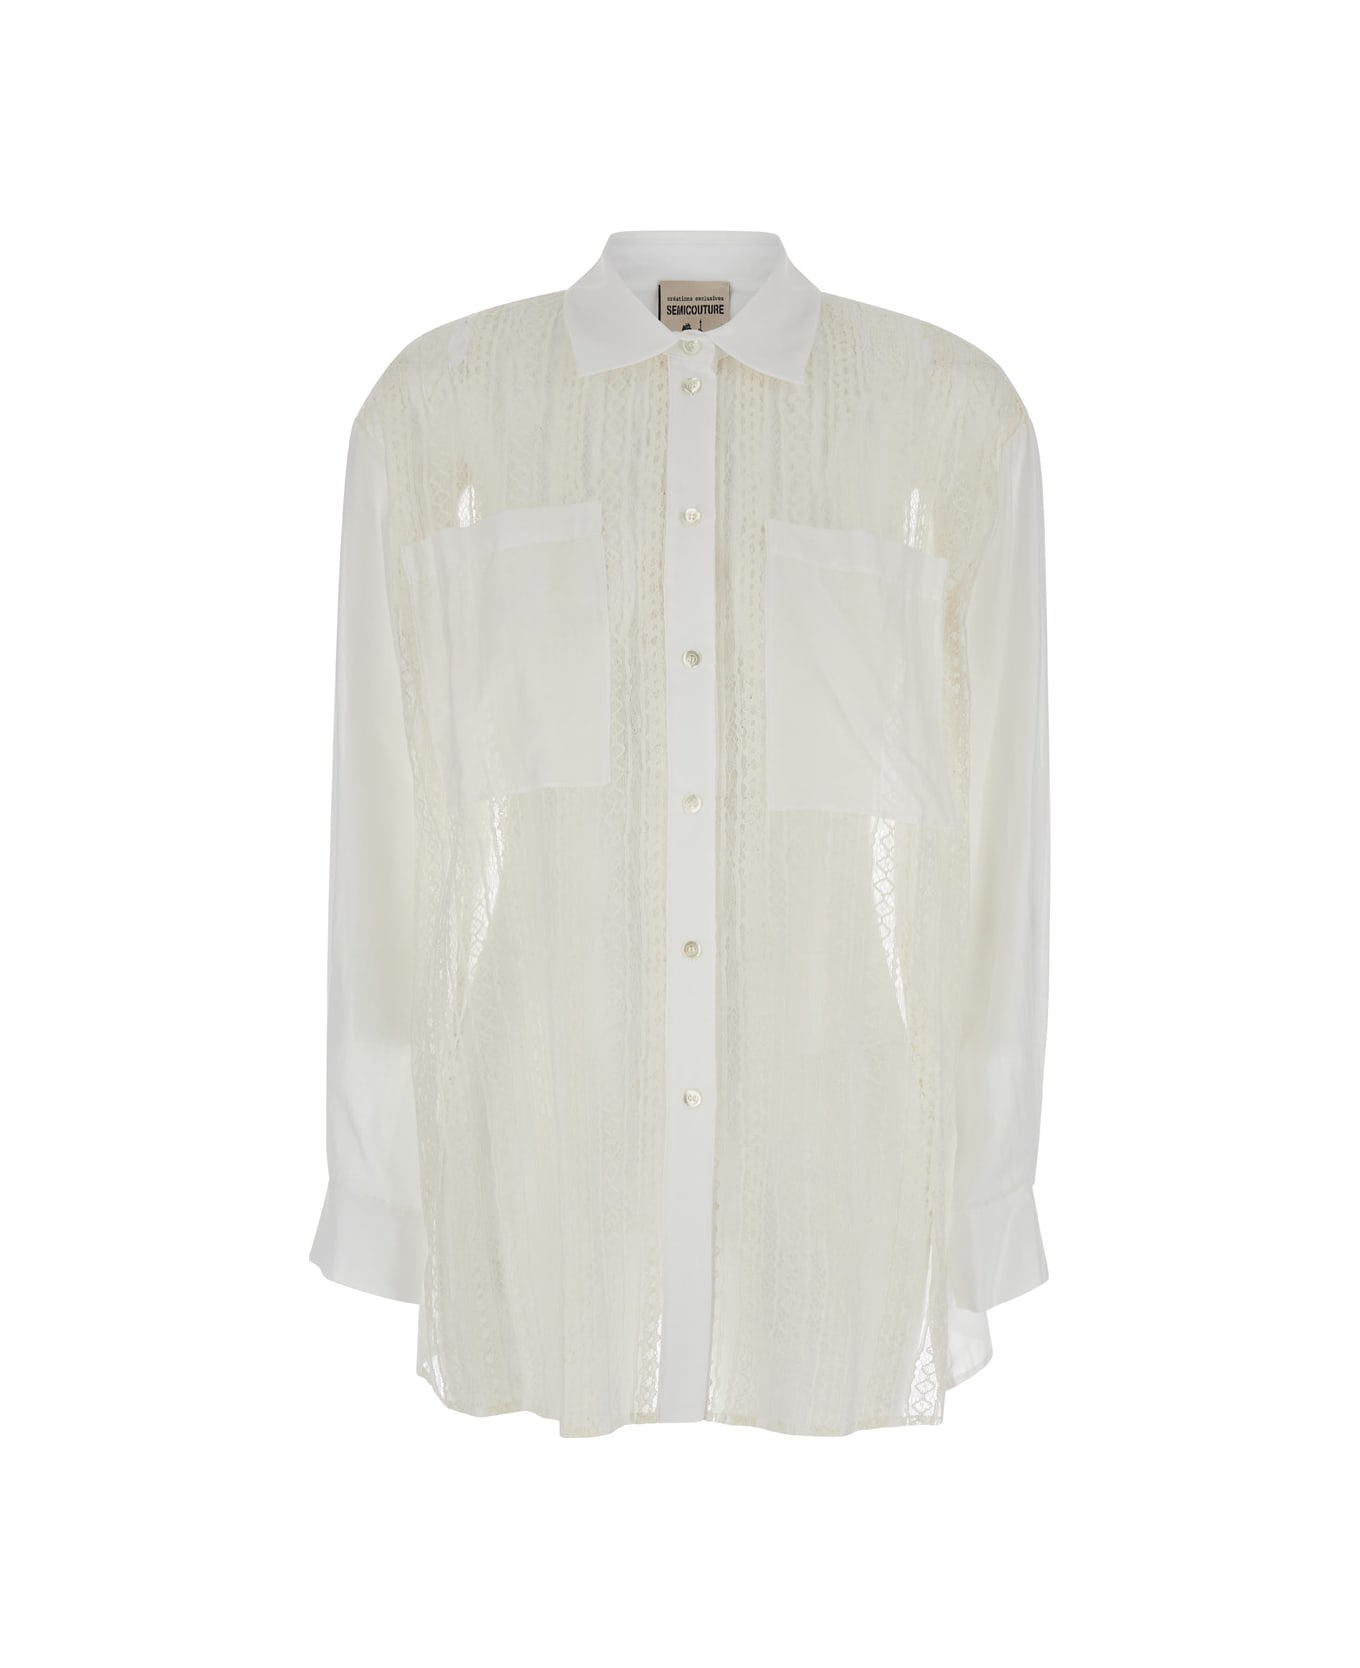 SEMICOUTURE White Panelled Lace Design Shirt In Cotton Blend Woman - White シャツ